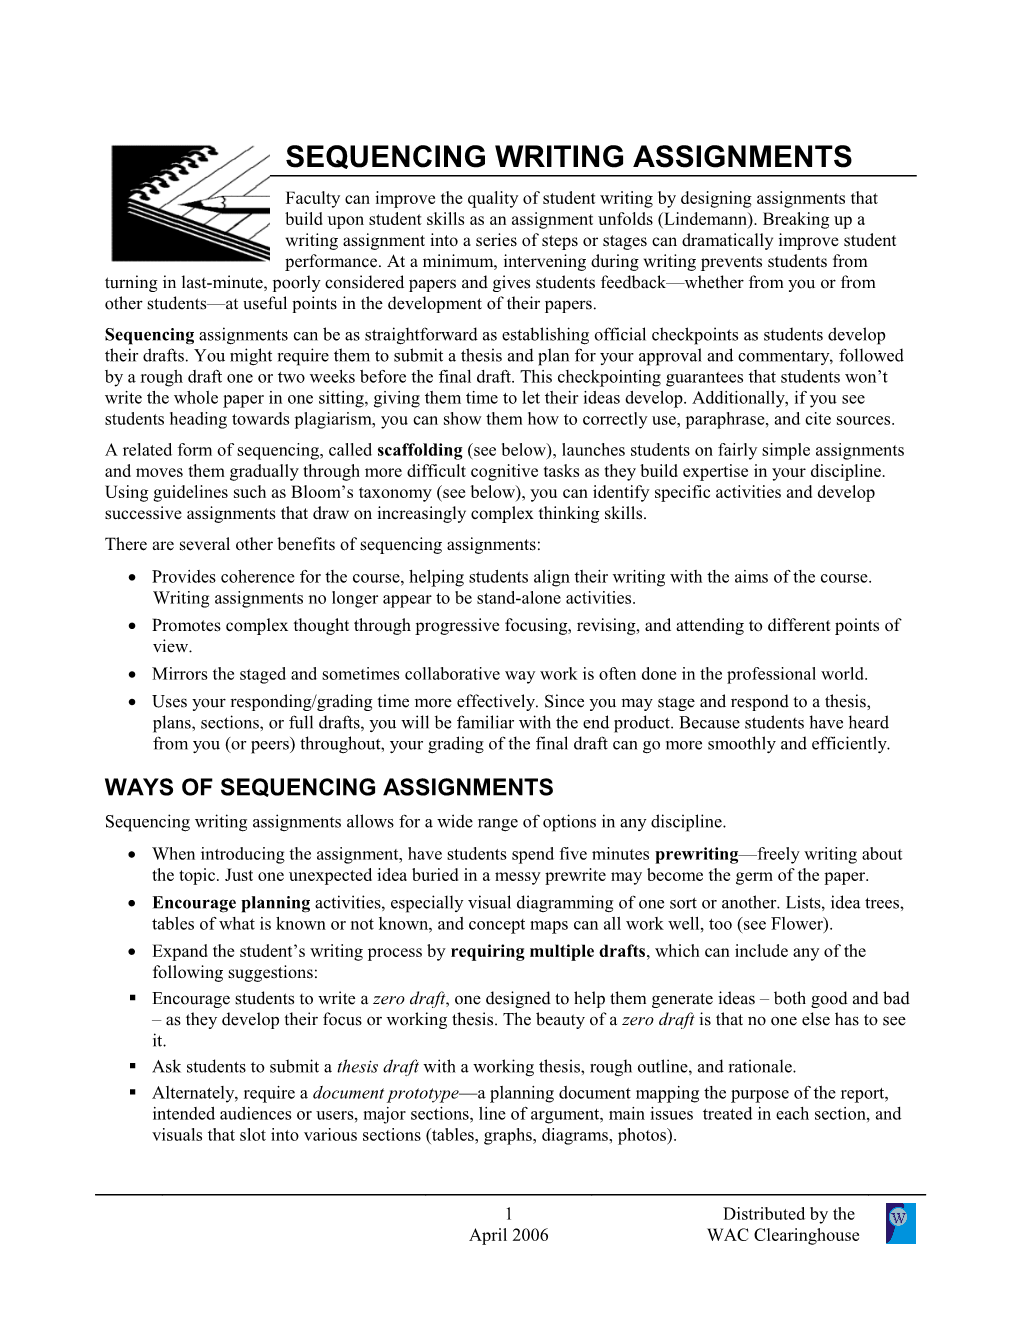 There Are Several Other Benefits of Sequencing Assignments